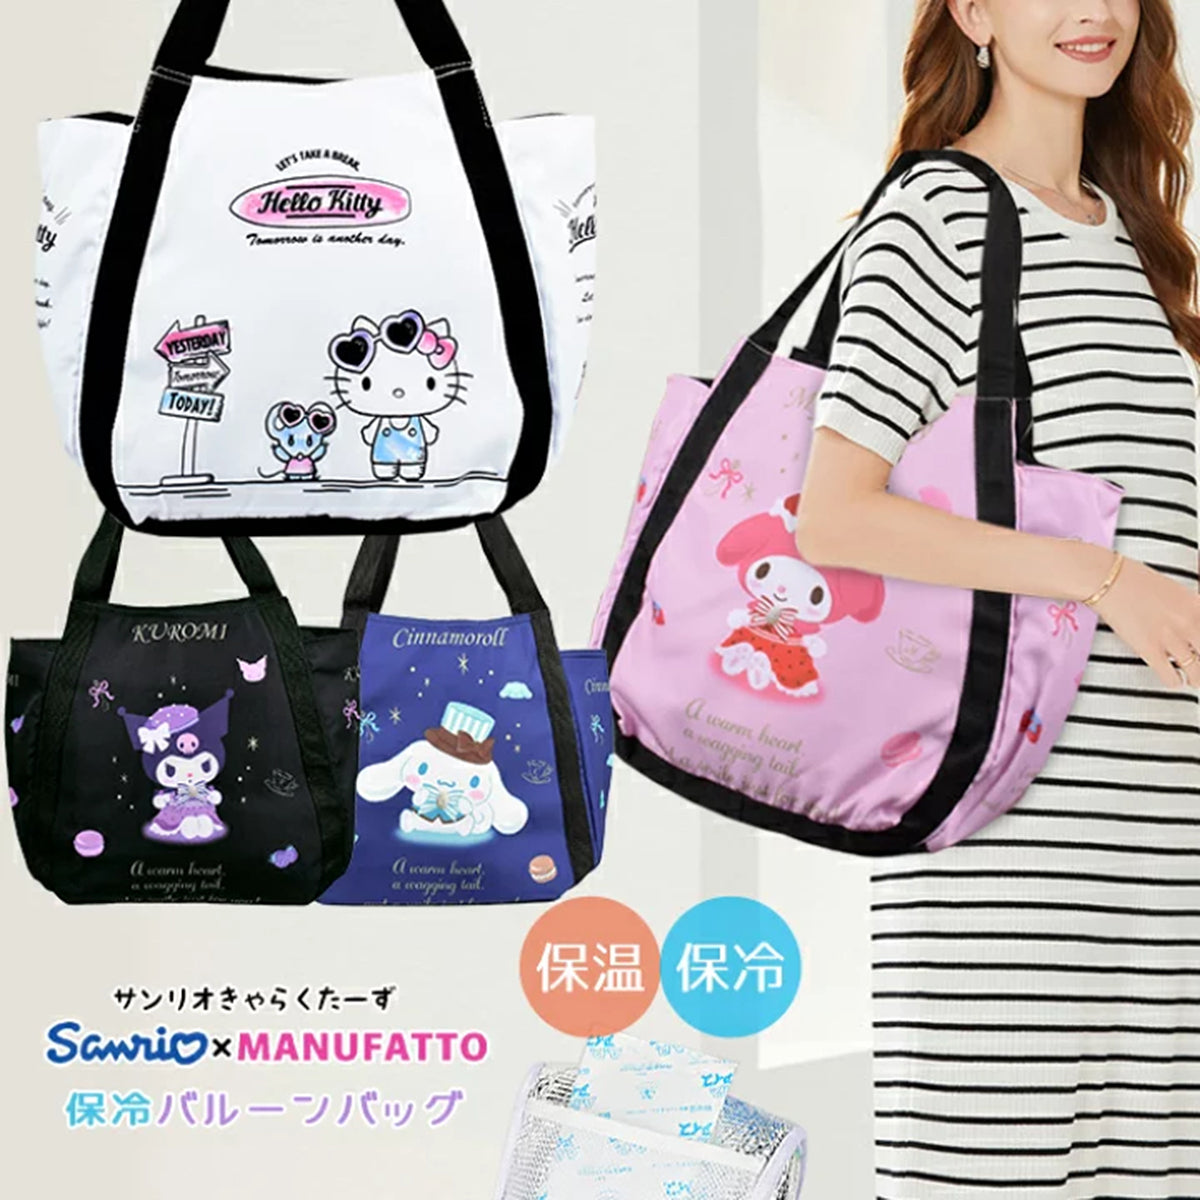 Sanrio Character Balloon Hat & Suit Tote Bag (Japan Edition)